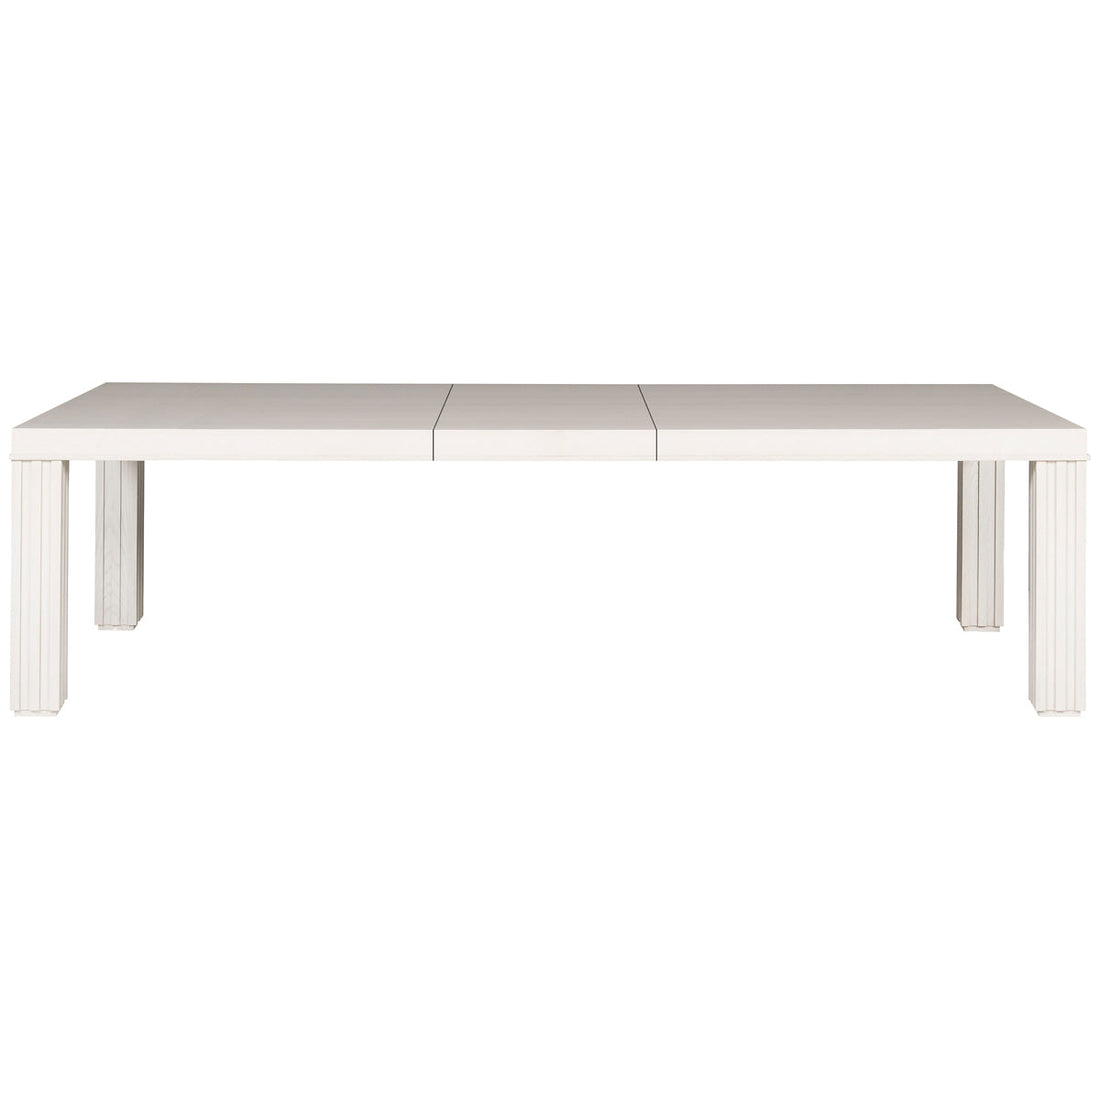 Vanguard Furniture Fluted Dining Table with Fluted Leg